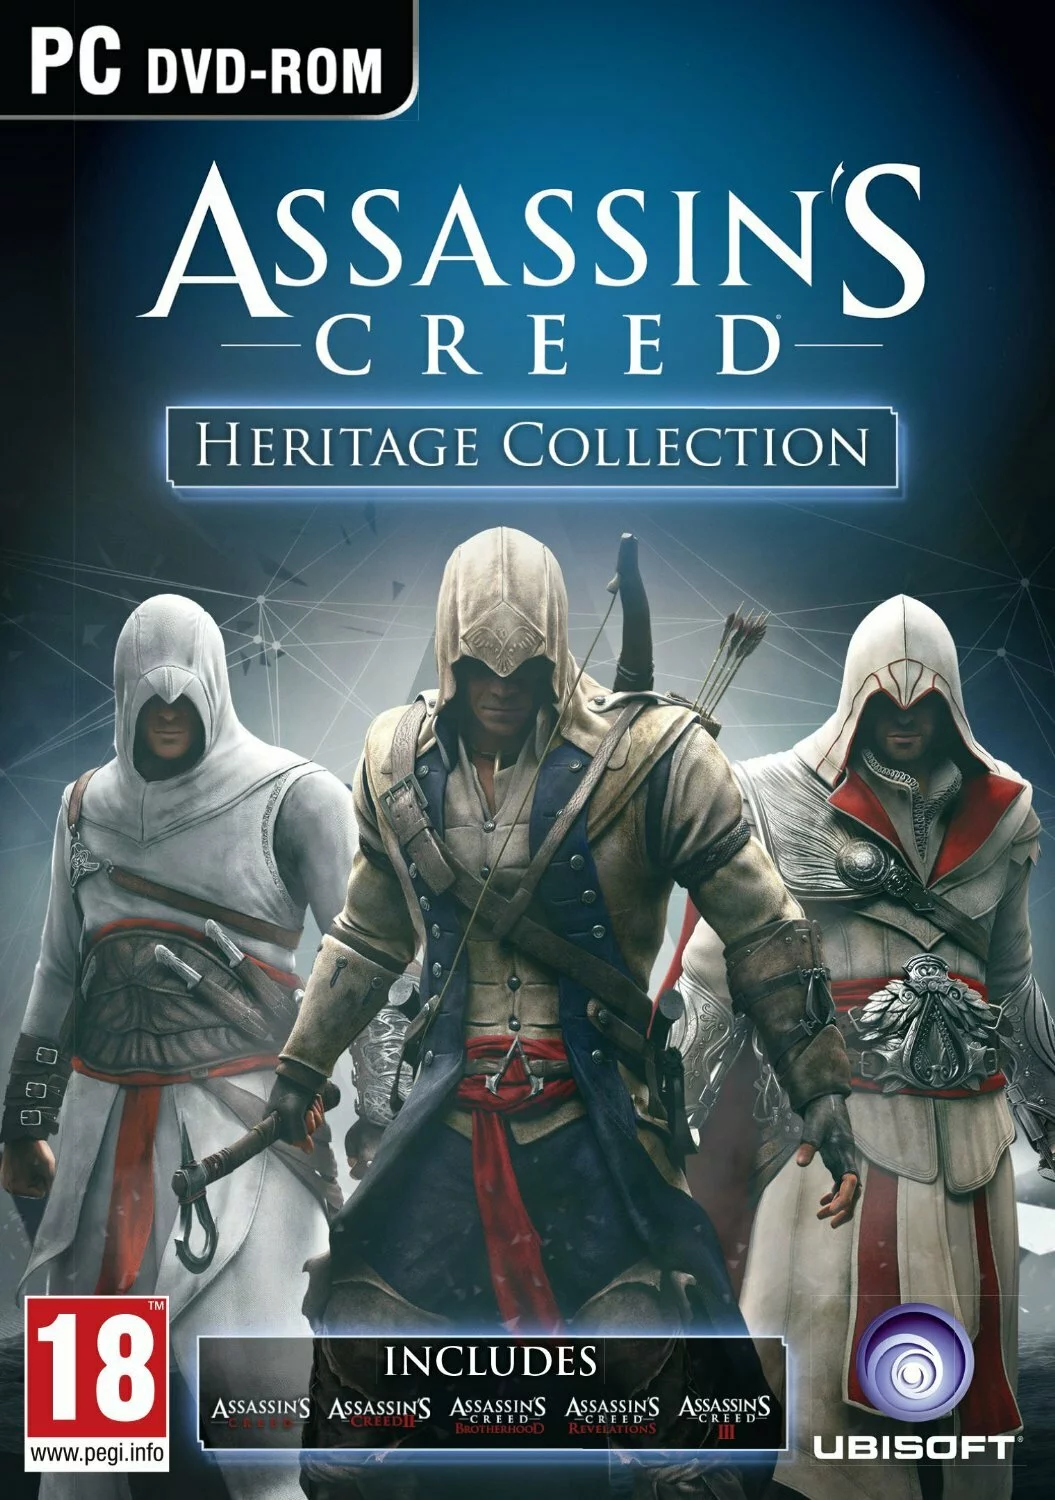 Assassins_Creed_Heritage_Collection_PC